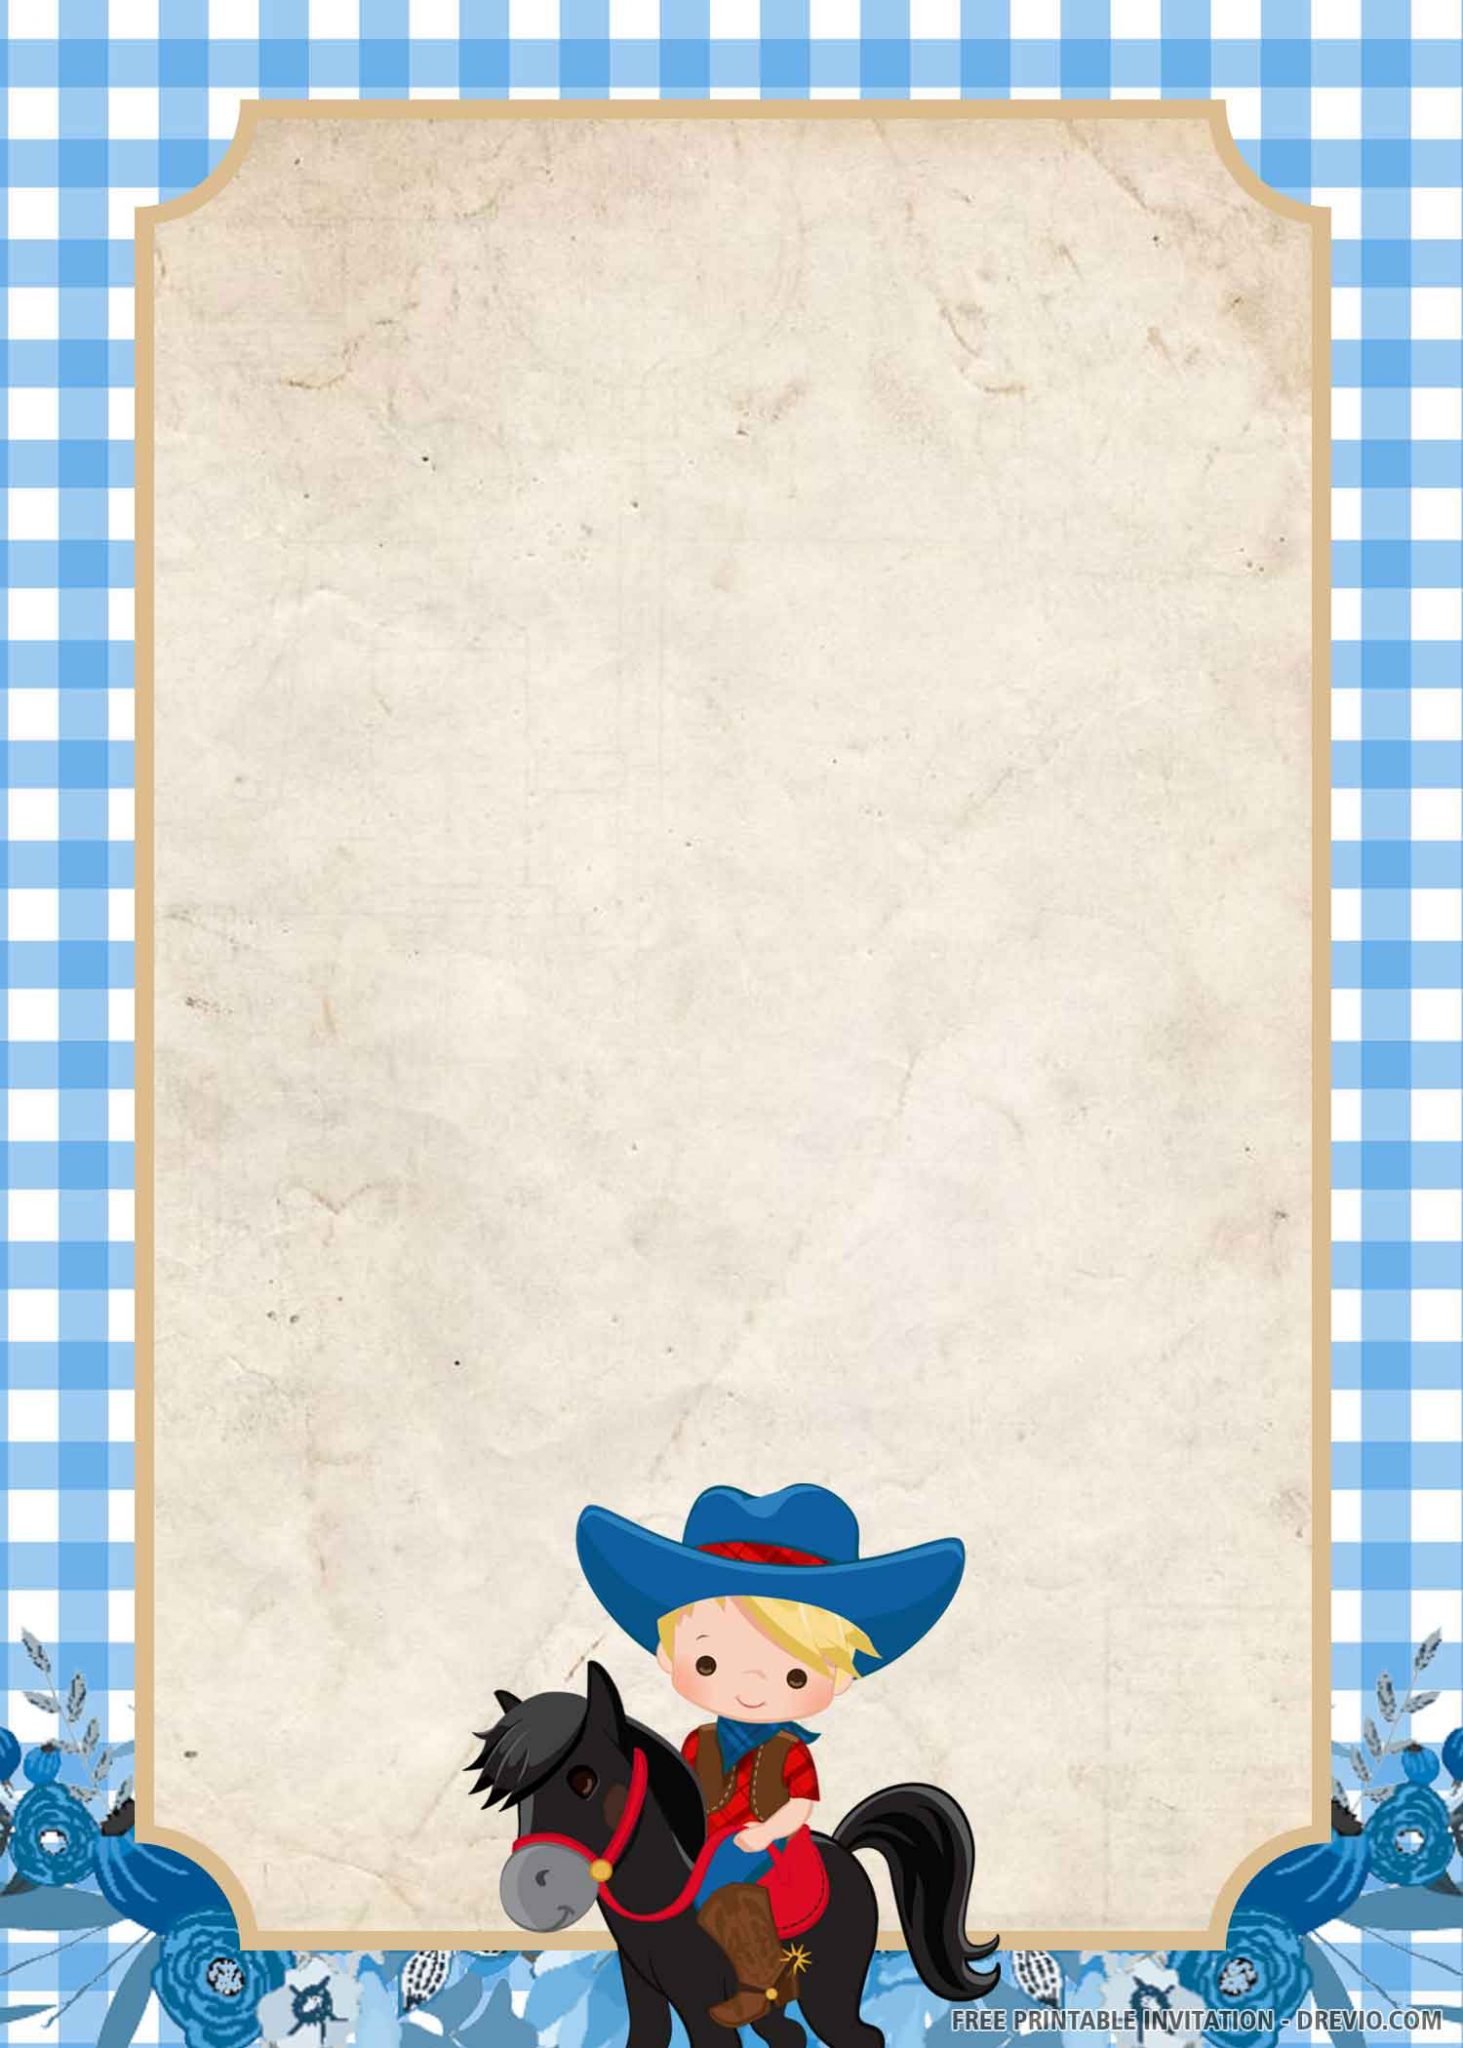 (FREE PRINTABLE) – Horse Riding Birthday Invitation Template | Download ...